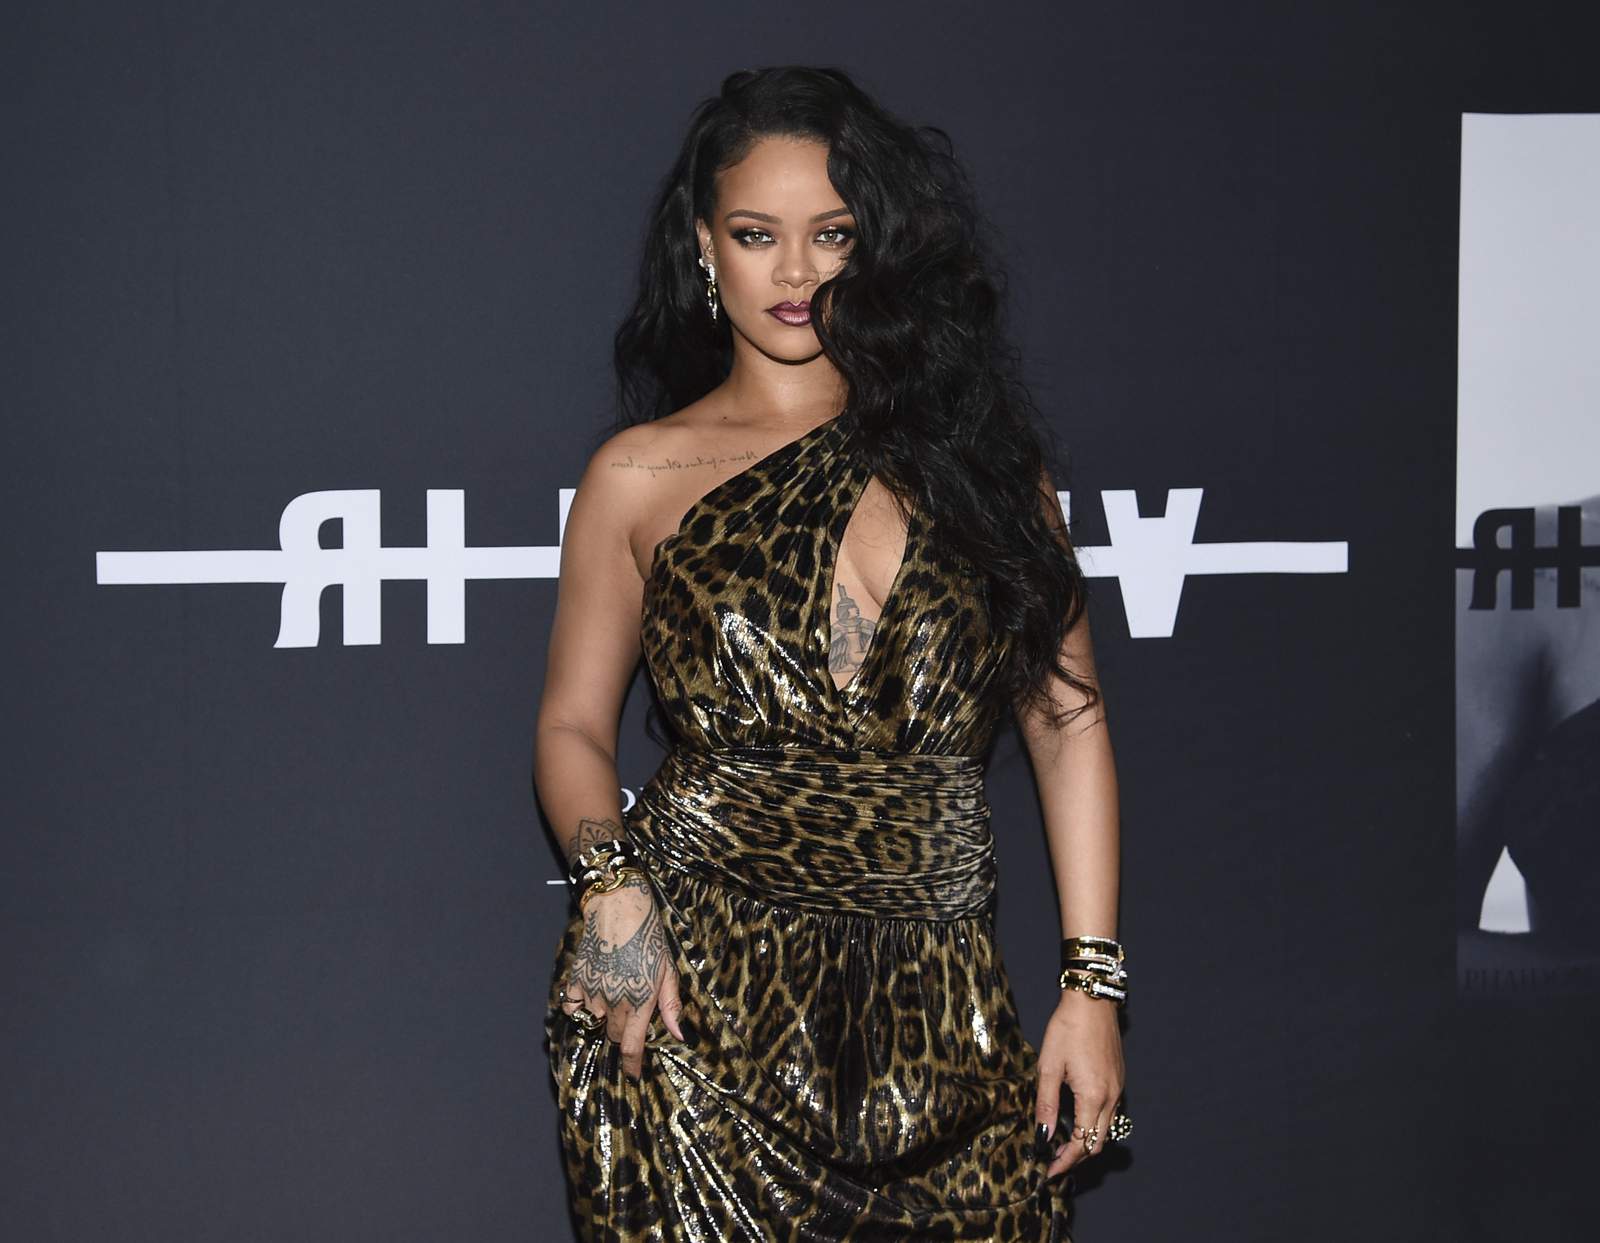 Rihanna on new album: 'I just want to have fun with music'